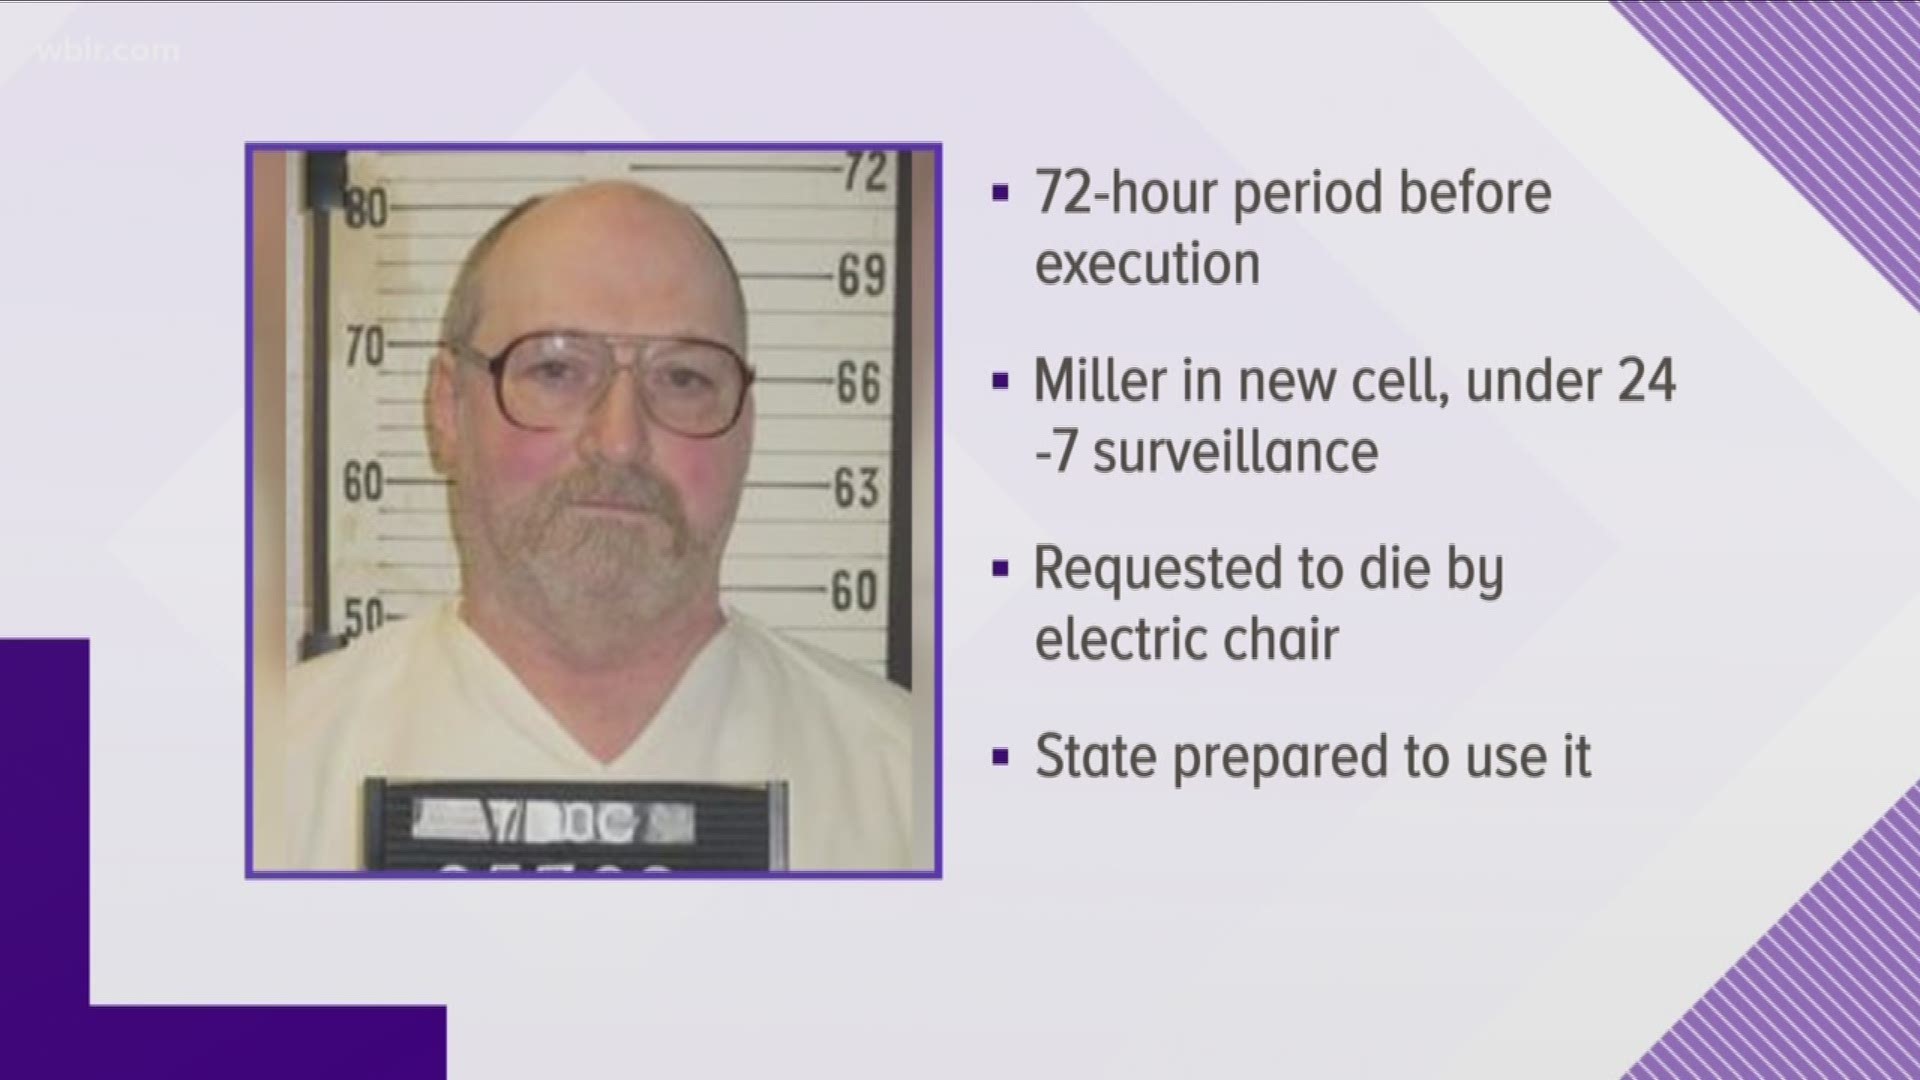 Miller is set to die by electric chair on Dec. 6.